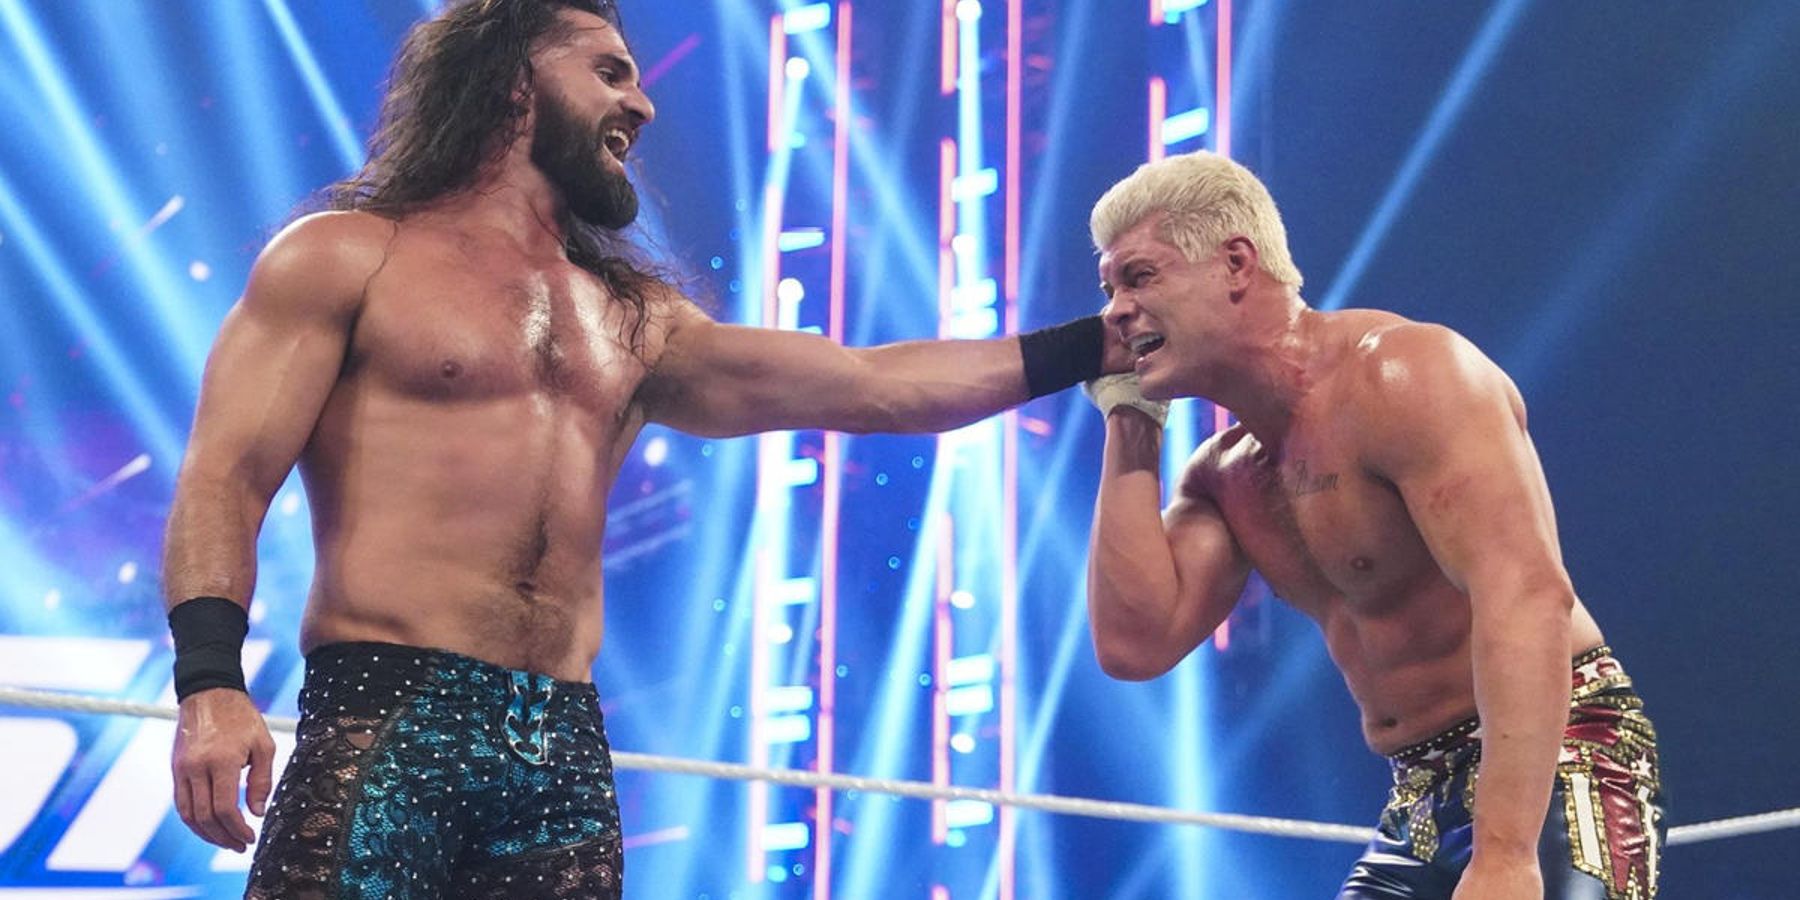 Seth Rollins gets the better of Cody Rhodes during their WrestleMania 38 rematch at WWE Backlash in 2022.